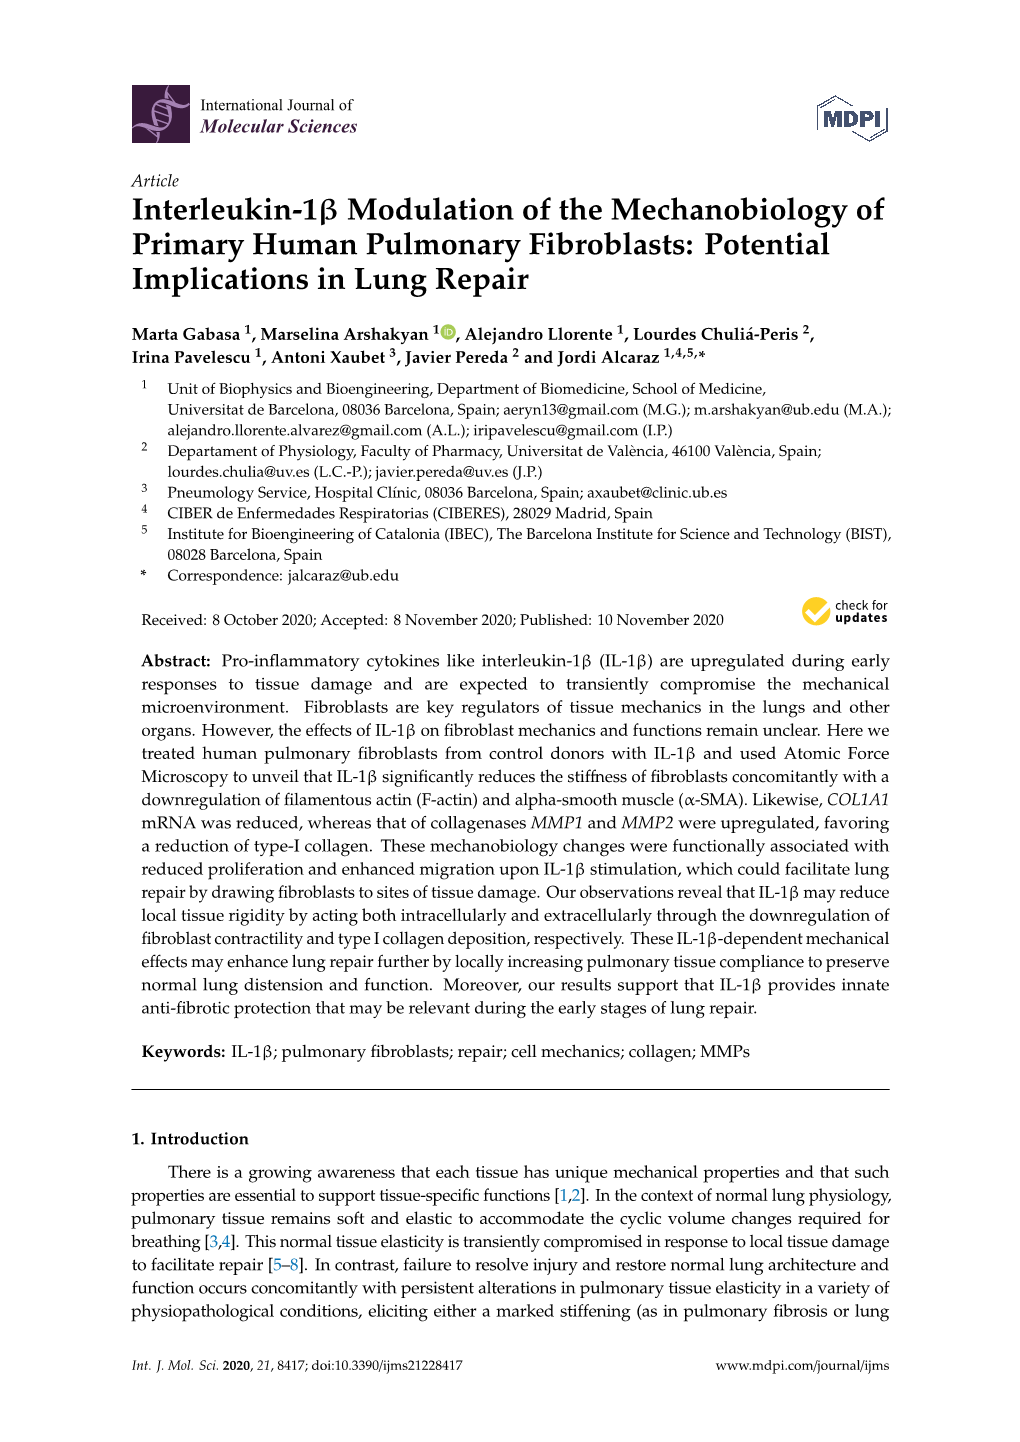 Interleukin-1 Modulation of the Mechanobiology of Primary Human Pulmonary Fibroblasts: Potential Implications in Lung Repair